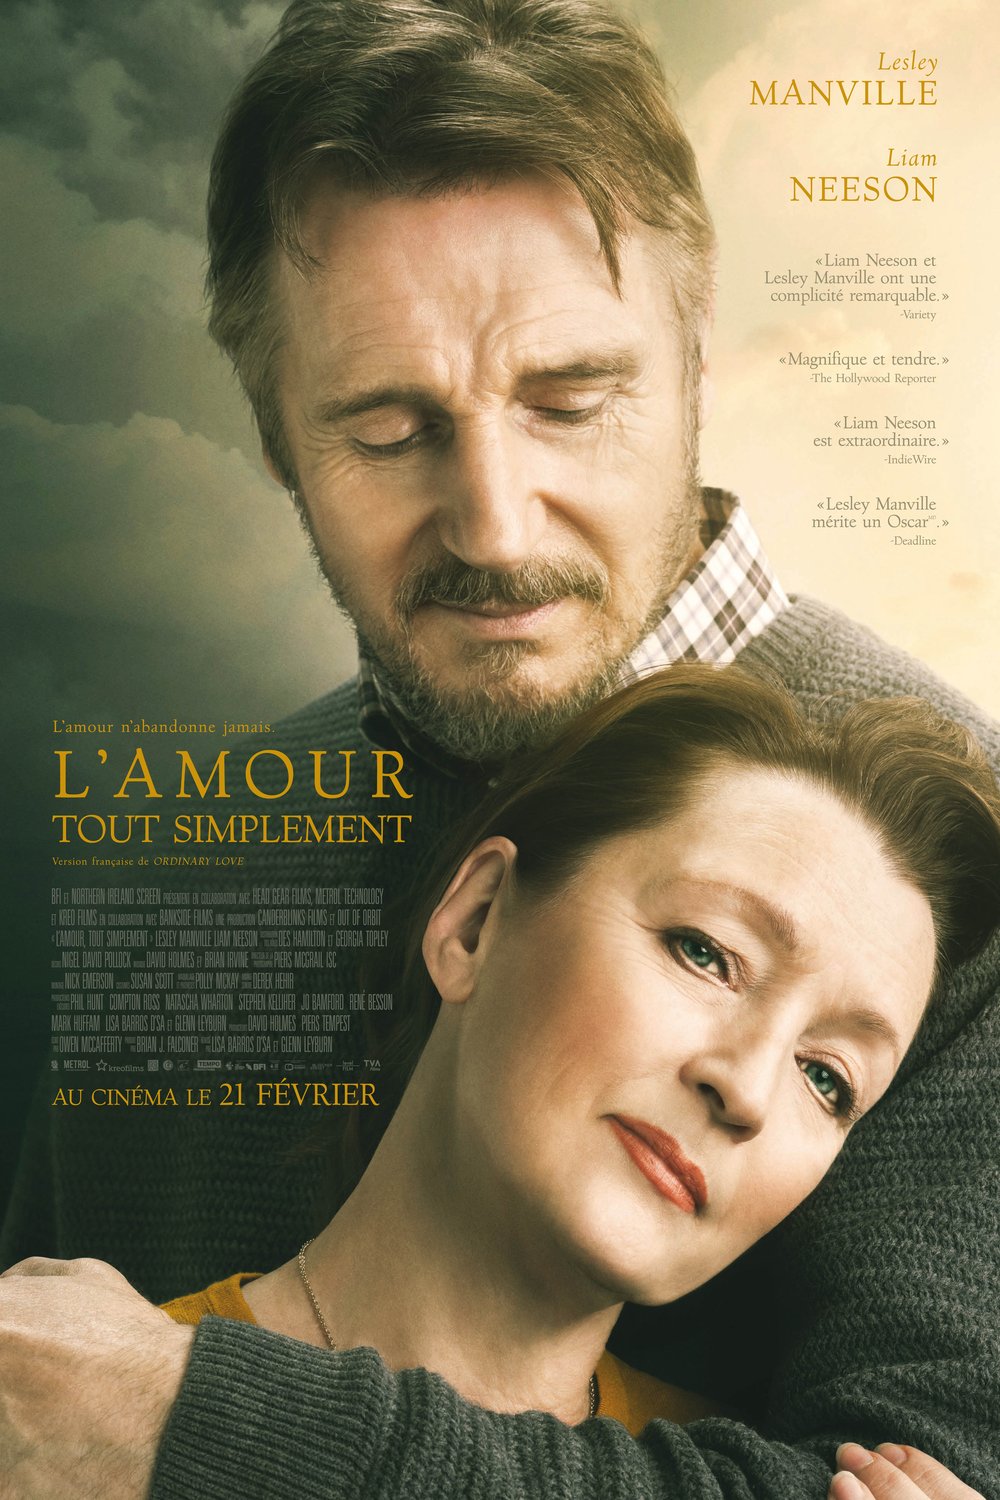 Poster of the movie L'Amour, tout simplement